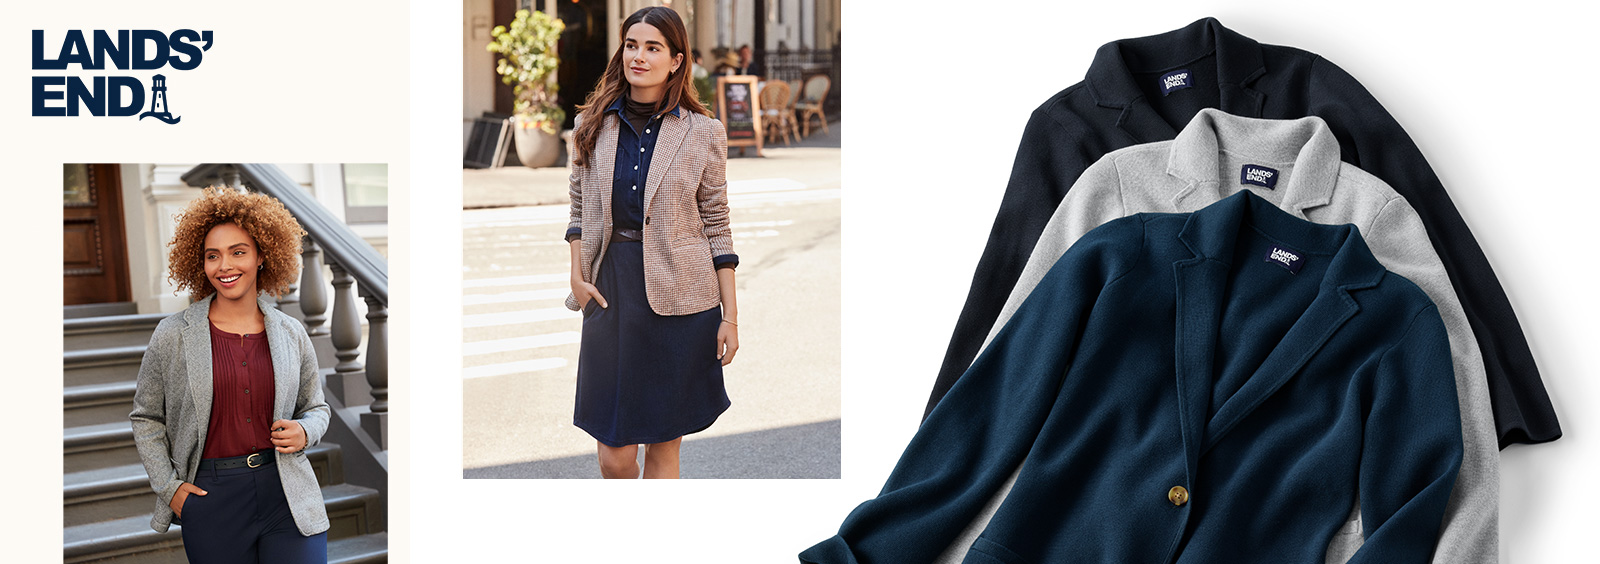 How to Nail the Scholarly Fashion Trend This Fall